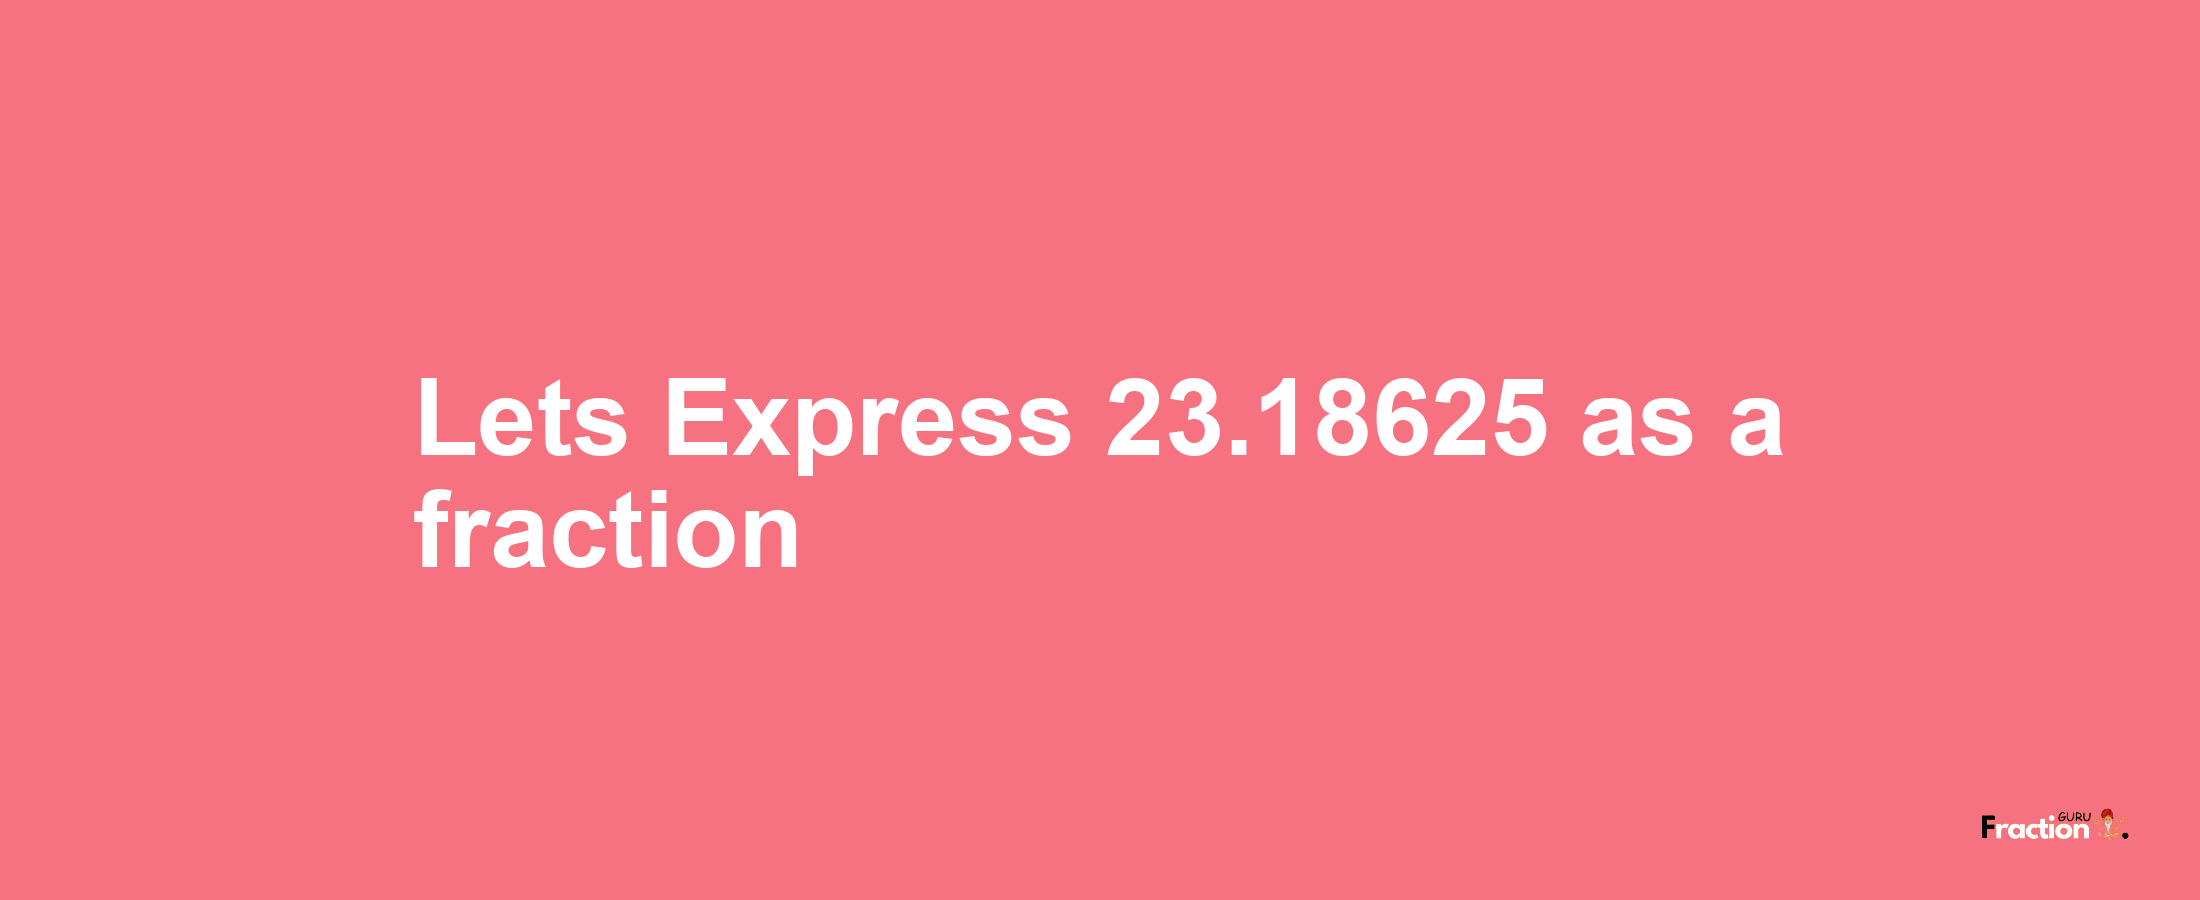 Lets Express 23.18625 as afraction